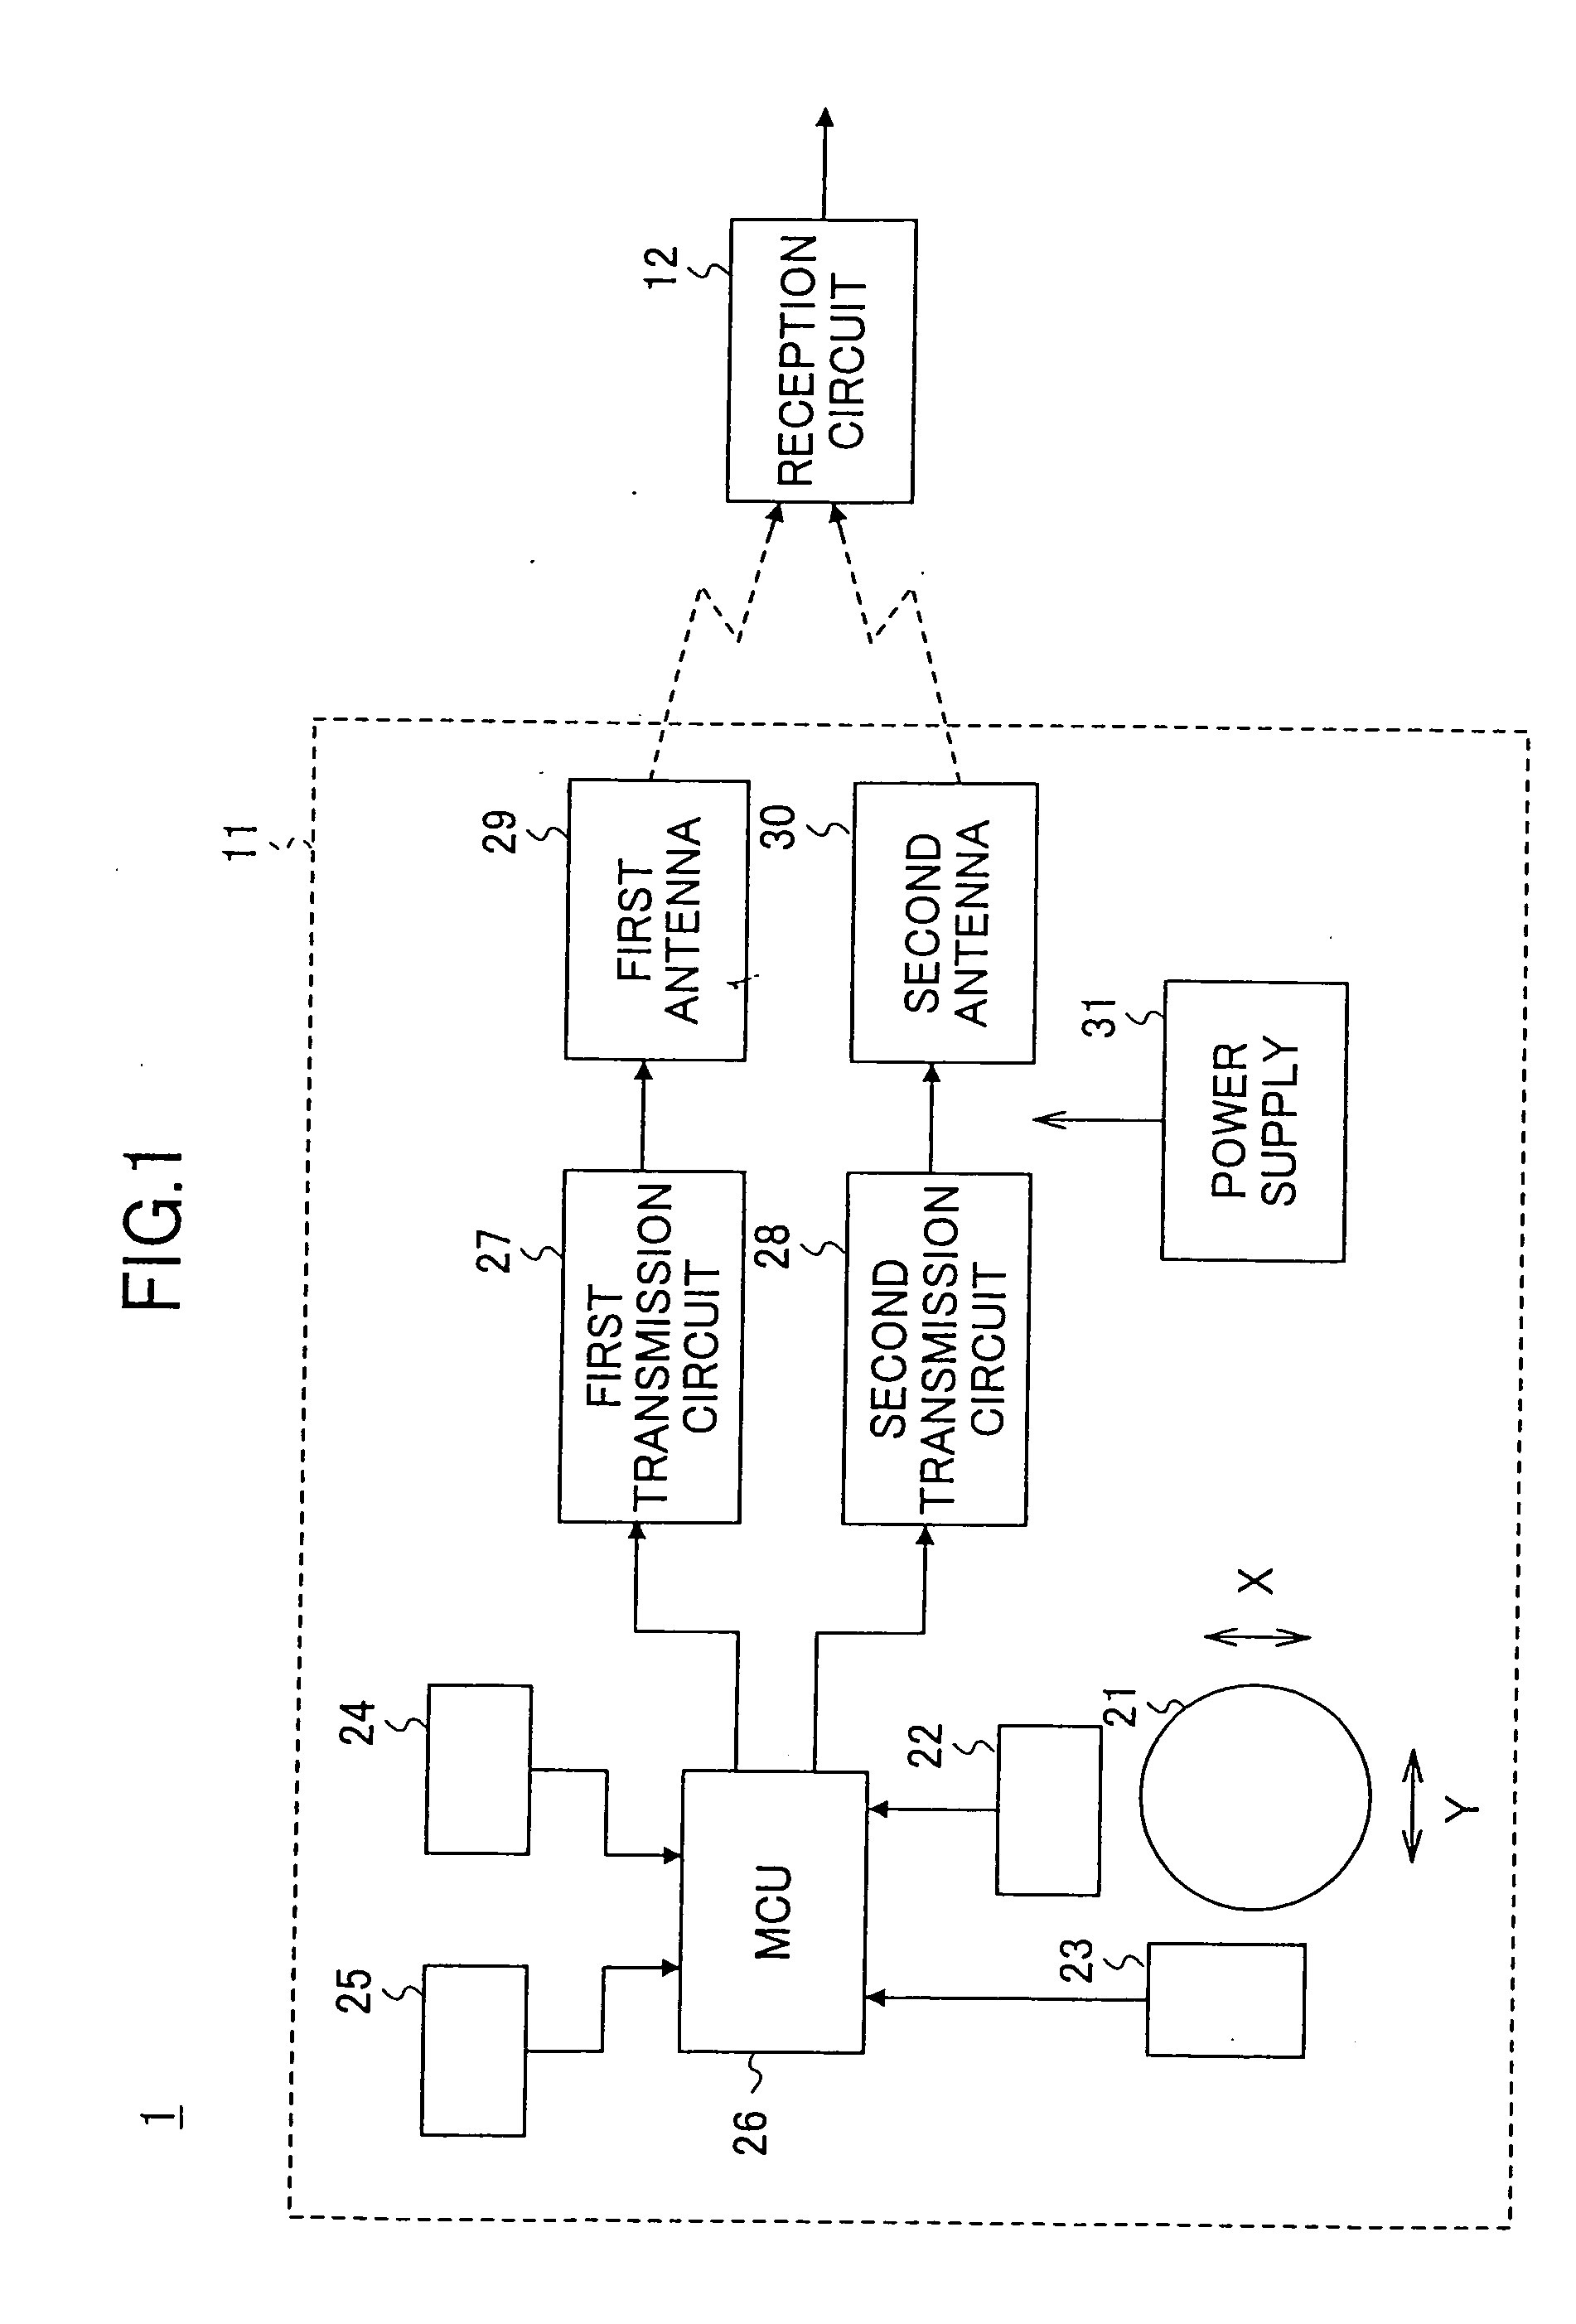 Input system and input device